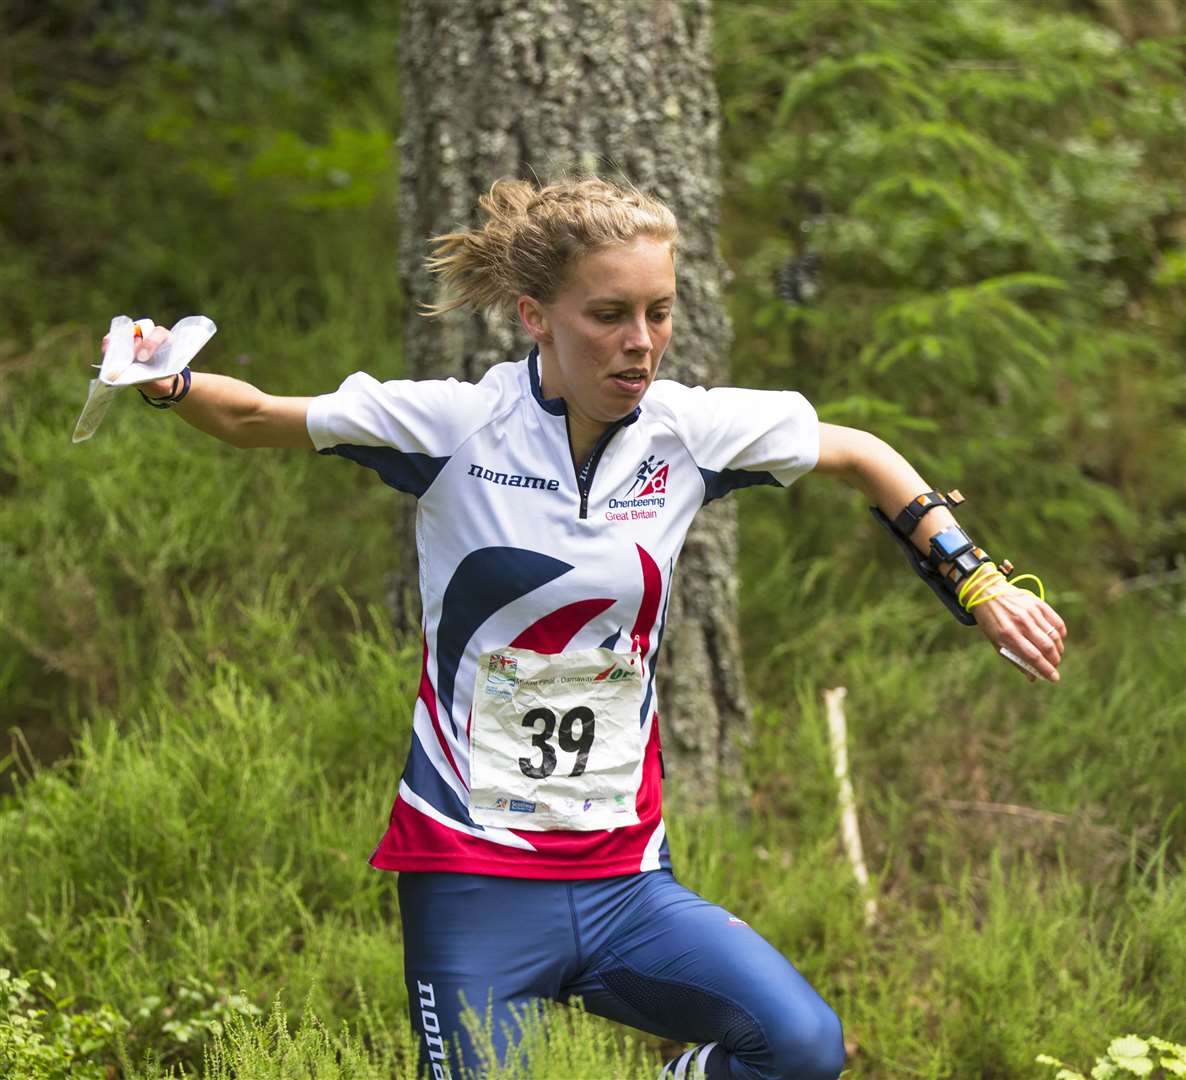 The Scottish six-day orienteering championships is coming to Moray.